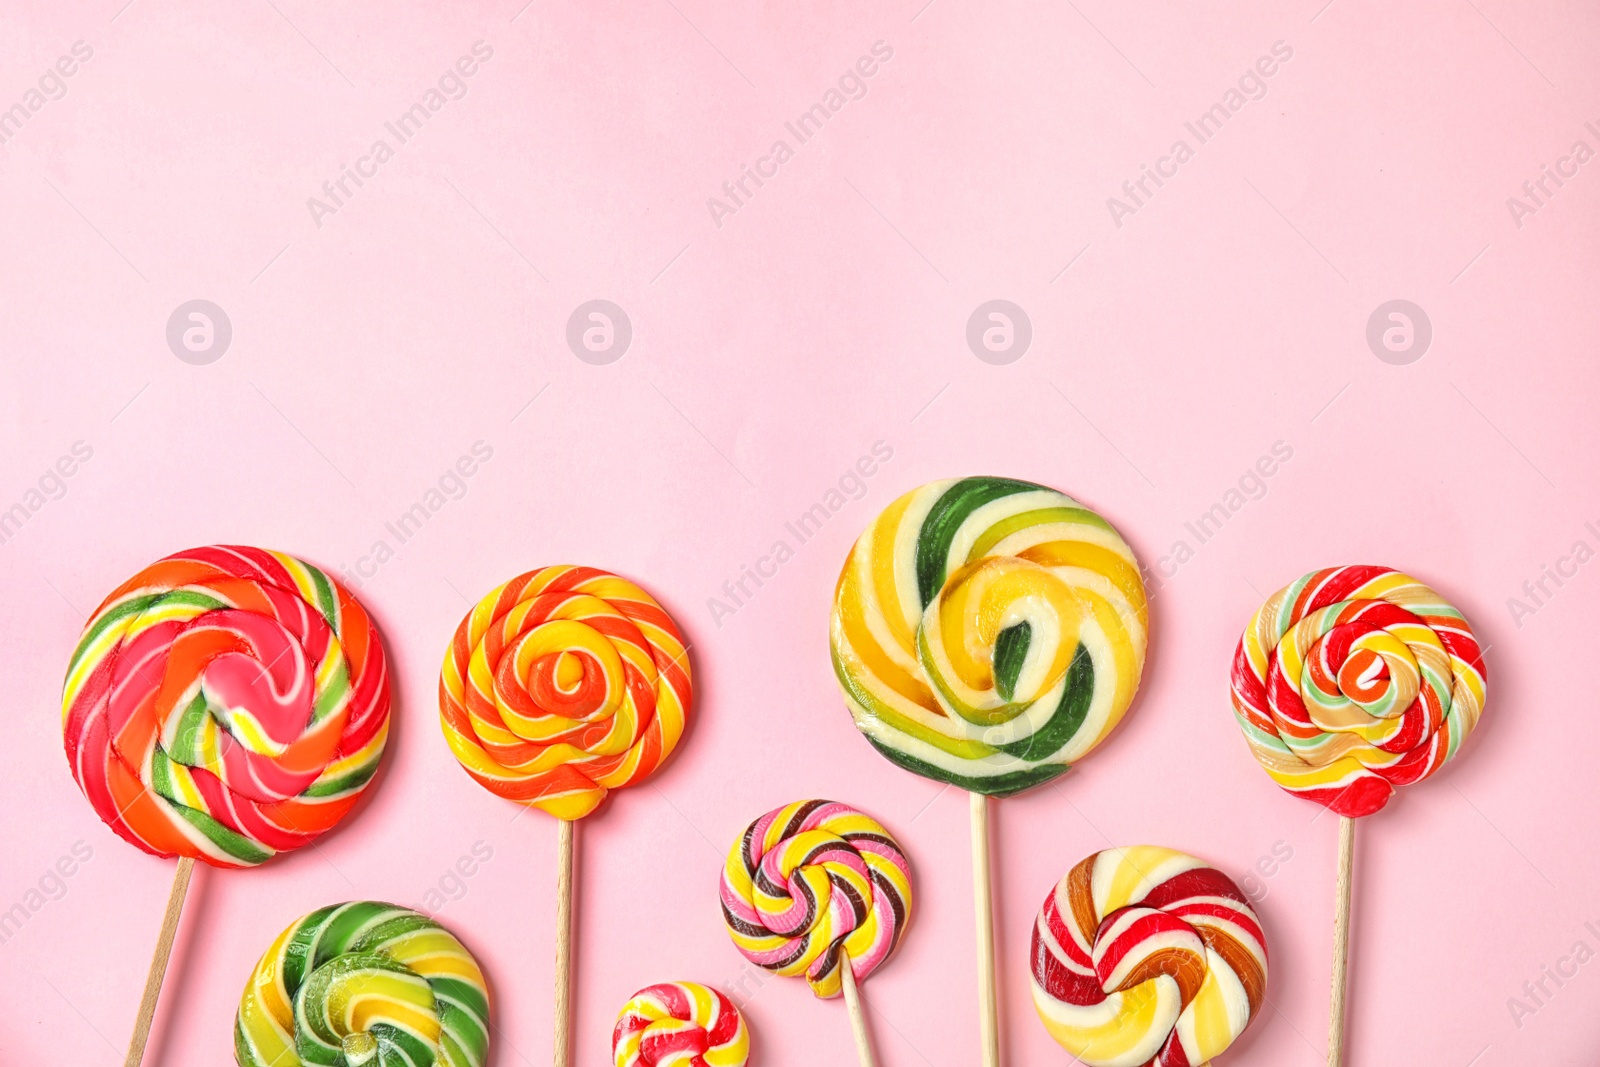 Photo of Flat lay composition with different yummy candies and space for text on color background